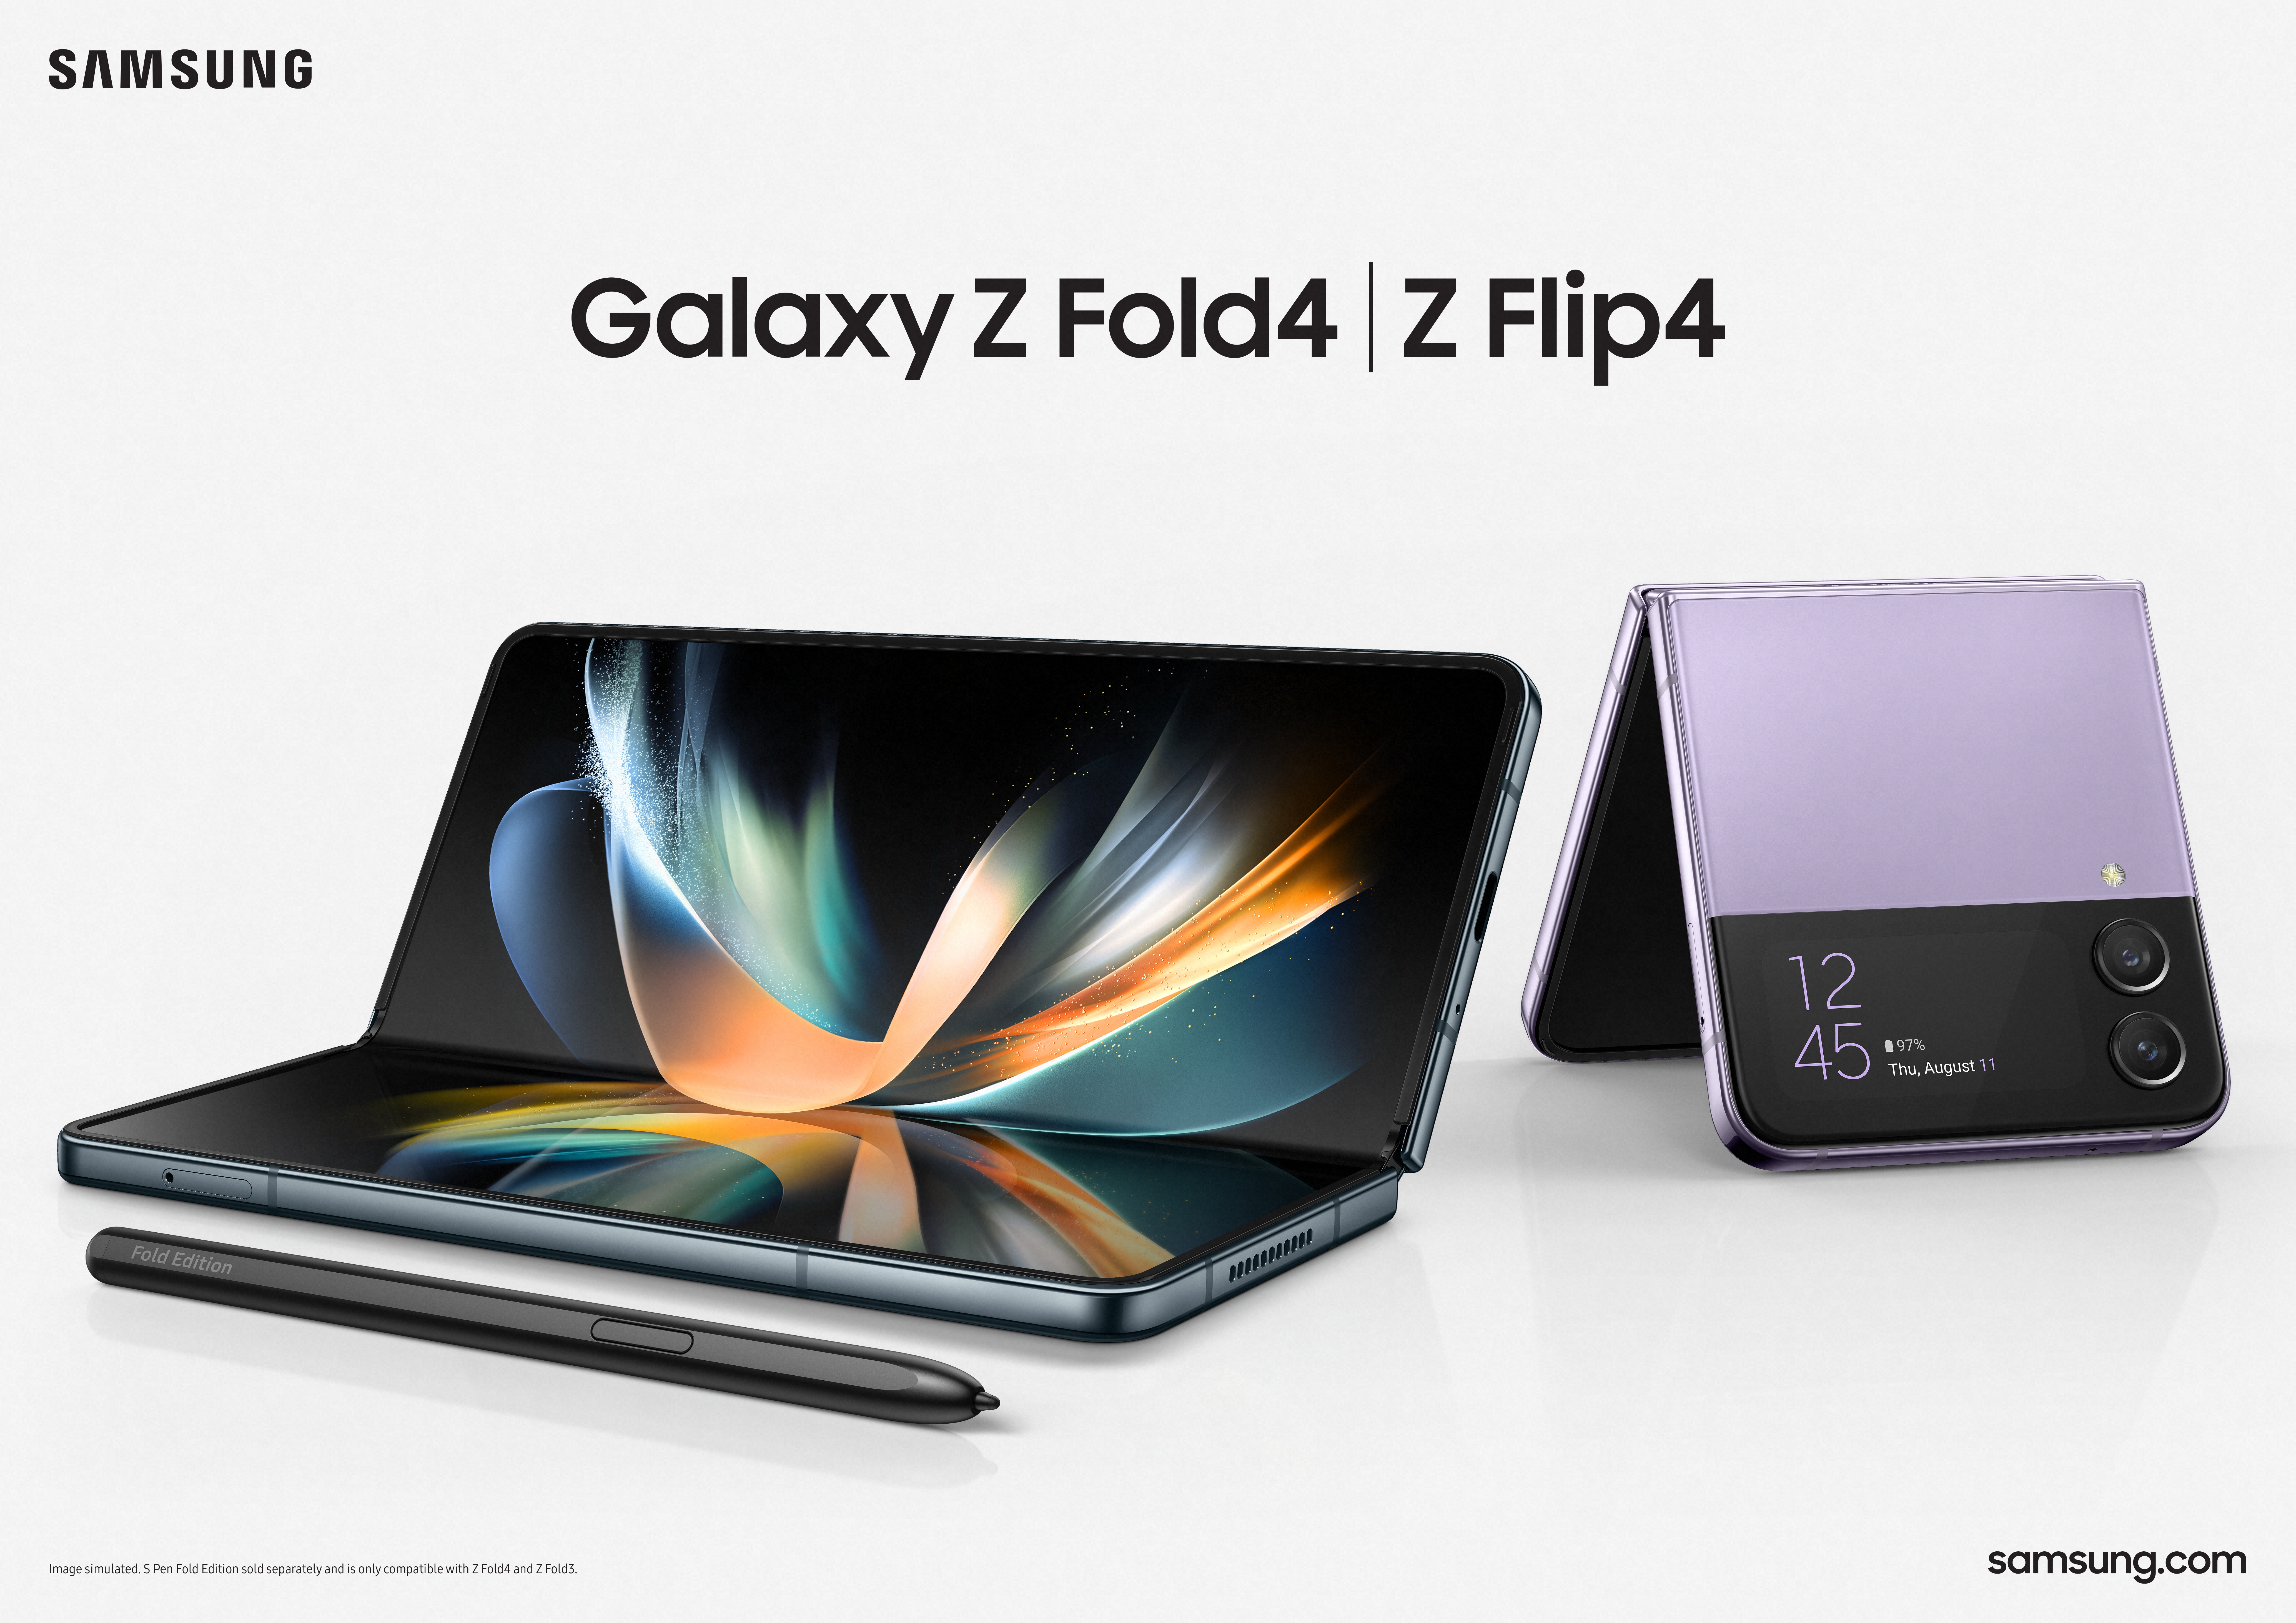 User Guide] Unfolding New Possibilities for Work and Play: Galaxy Z Fold4  for On-the-Go Productivity – Samsung Global Newsroom